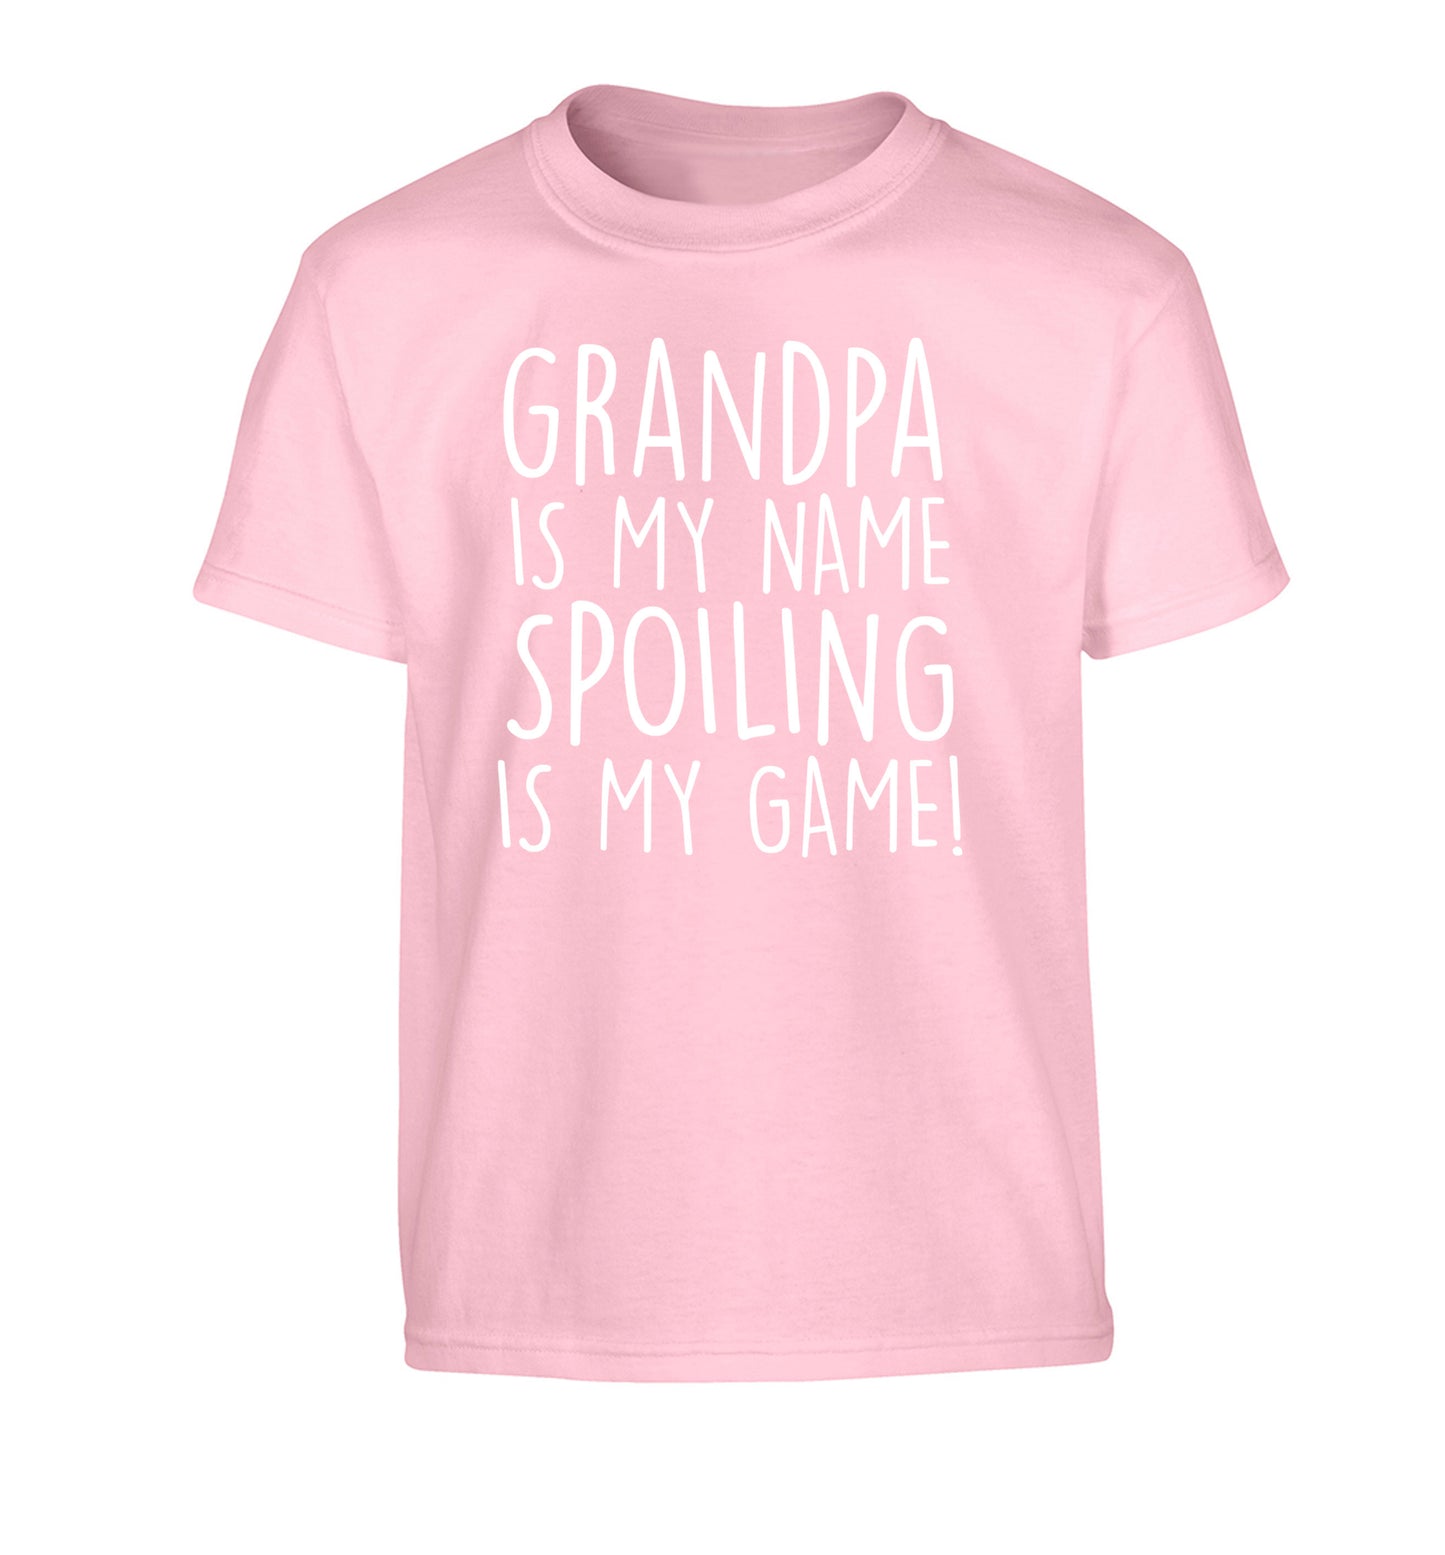 Grandpa is my name, spoiling is my game Children's light pink Tshirt 12-14 Years